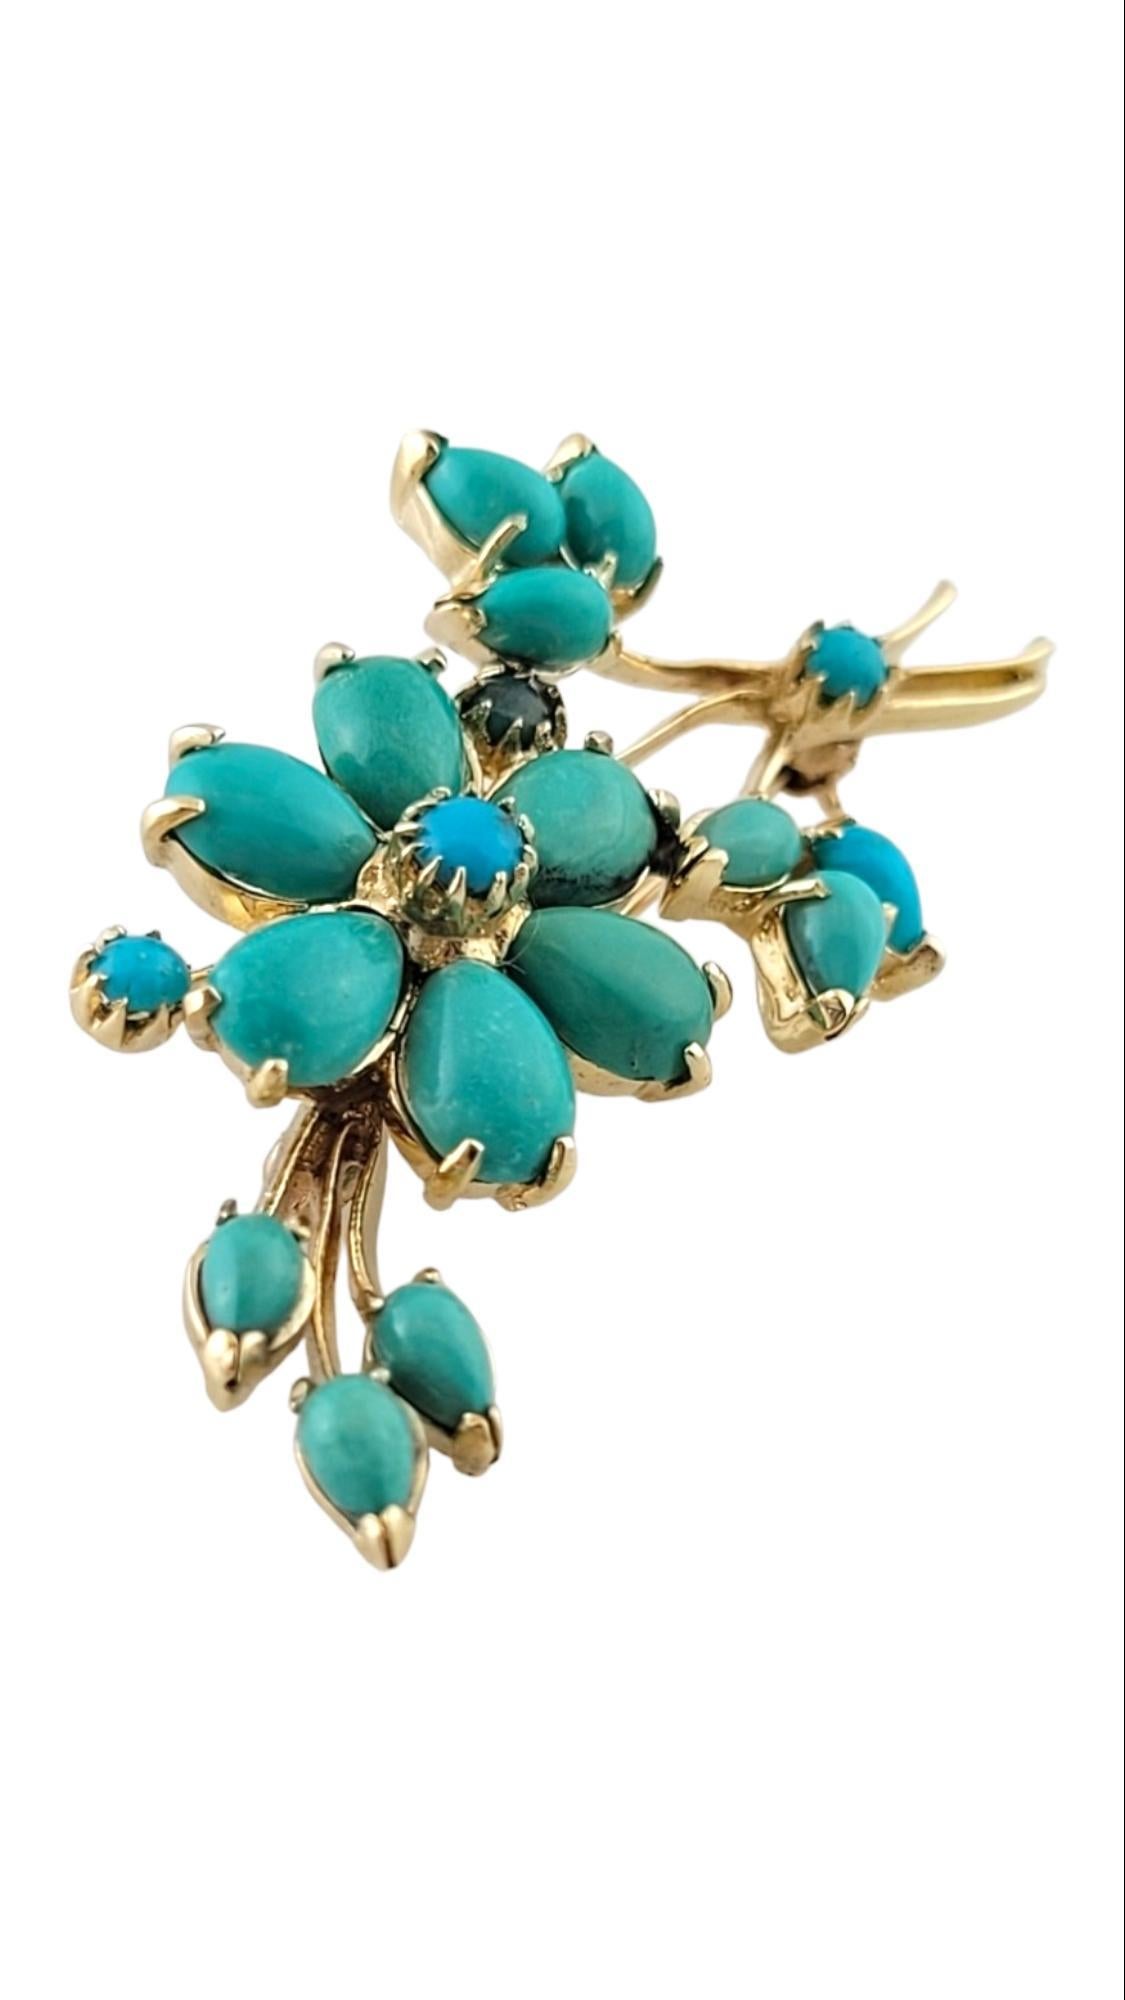 14K Yellow Gold Flower Pin with Turquoise Stones #15186 In Good Condition For Sale In Washington Depot, CT